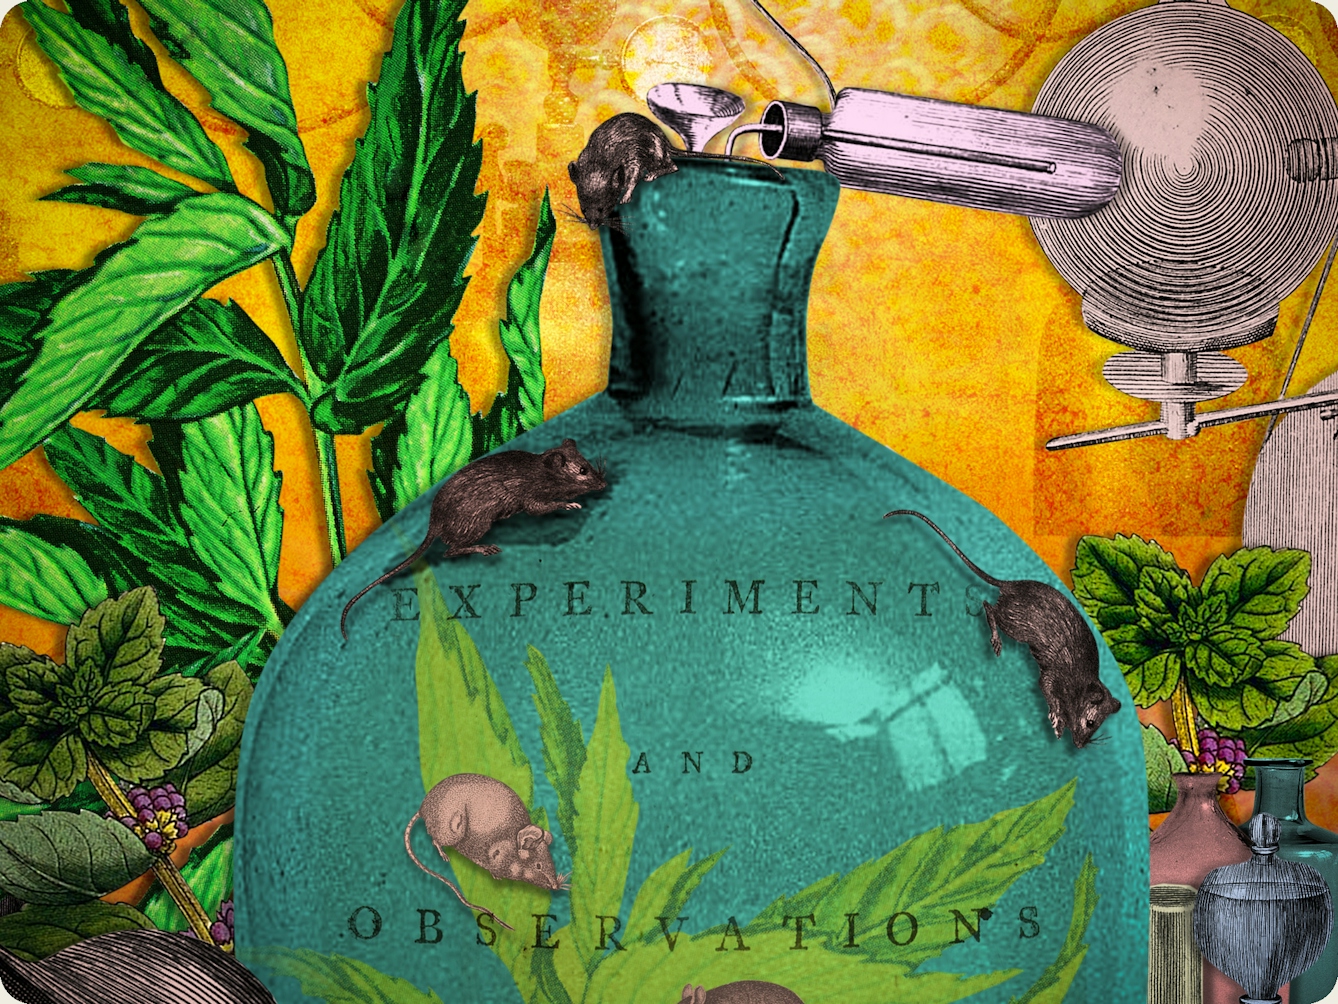 Detail from a larger digital montage artwork created using archive material. The image shows part of a larger science experiment with all sorts of things going on. A large glass bell jar is at the centre containing mice, mint leaves and the title page from a book which reads, 'Experiment and Observations...". Surrounding the jar are other scientific instruments including test tubes, condensing tubes, and mechanical tools. More mice run over these elements surrounded by mint leaves.